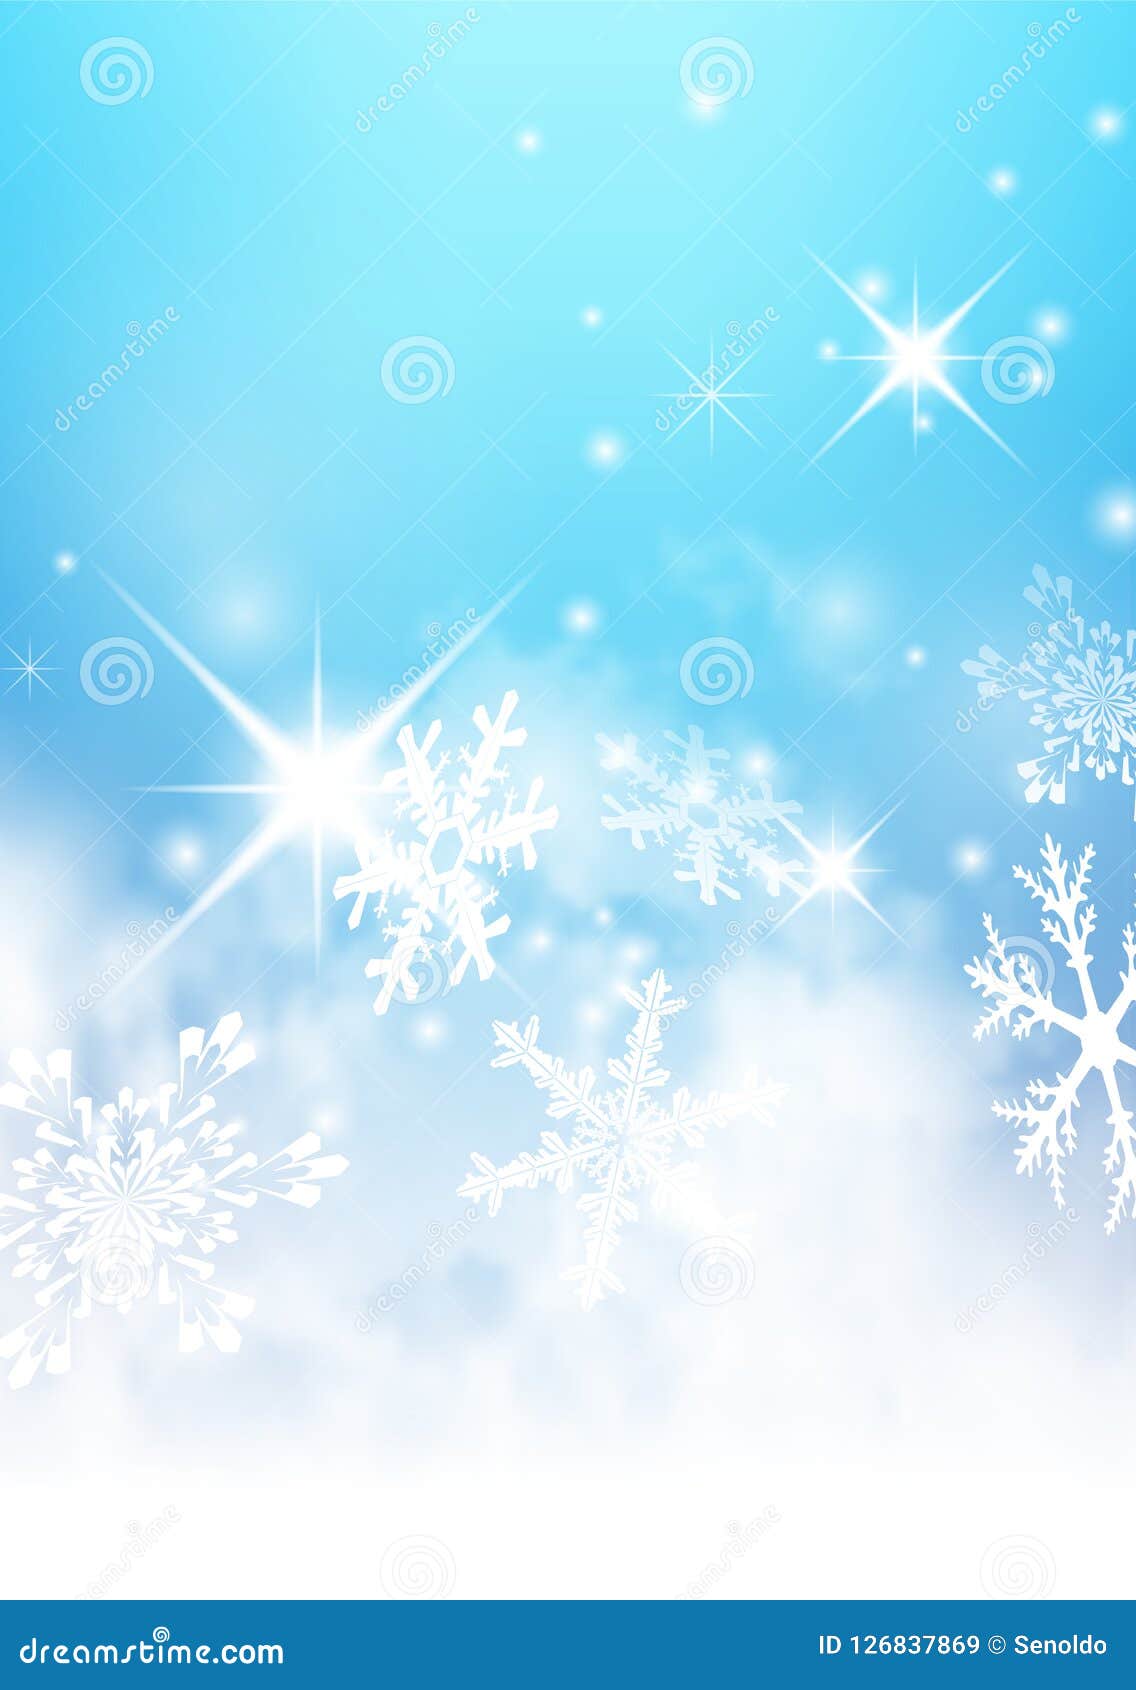 abstract freezing and wintry cold blue background with snowflakes and starlets